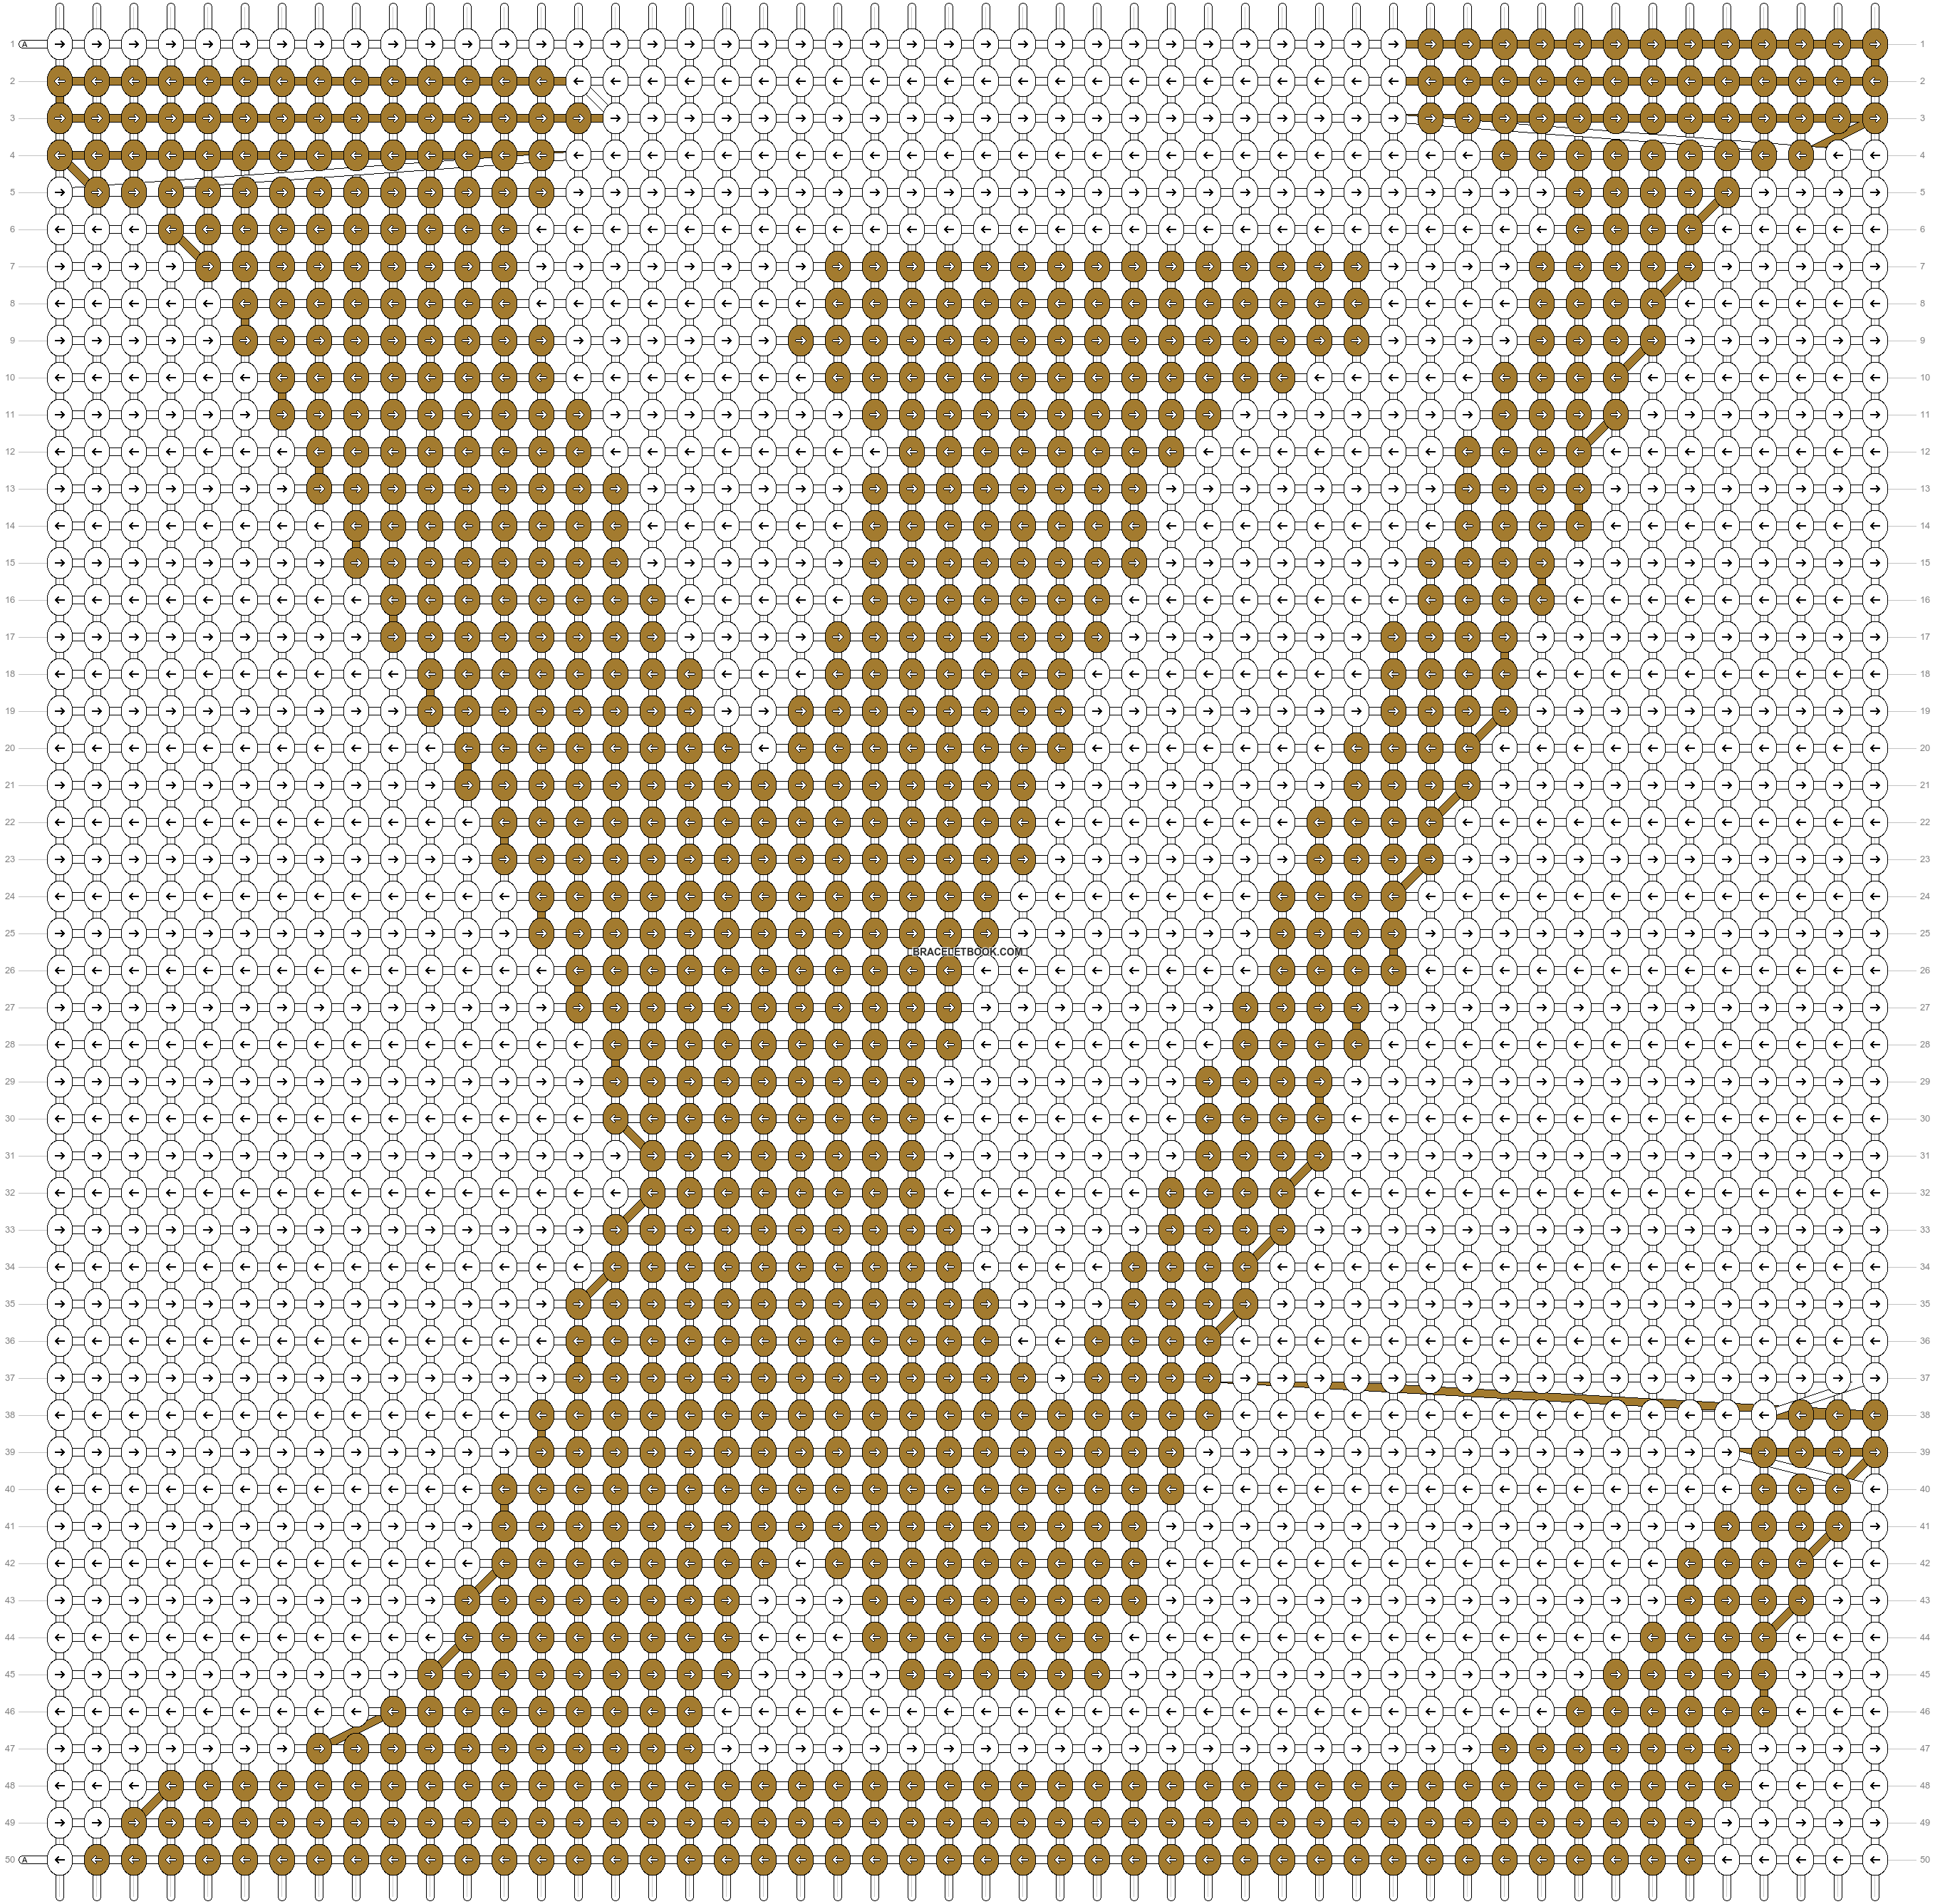 Image result for louis vuitton logo cross stitch